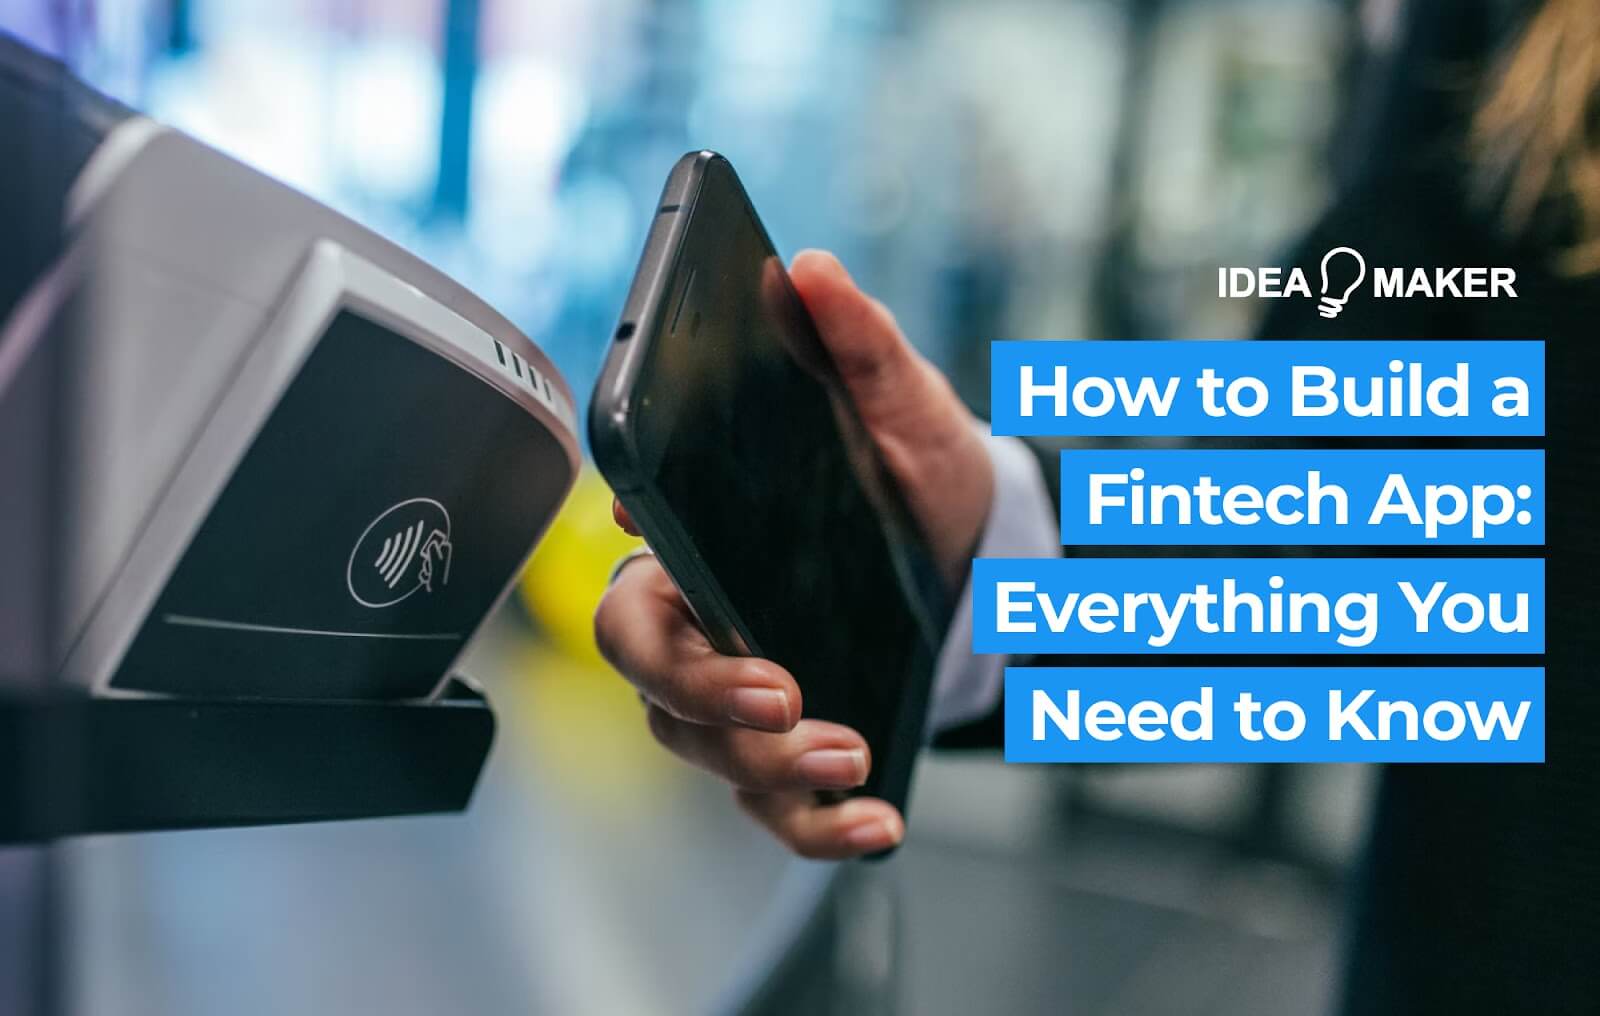 How to Build a Fintech App: Everything You Need to Know